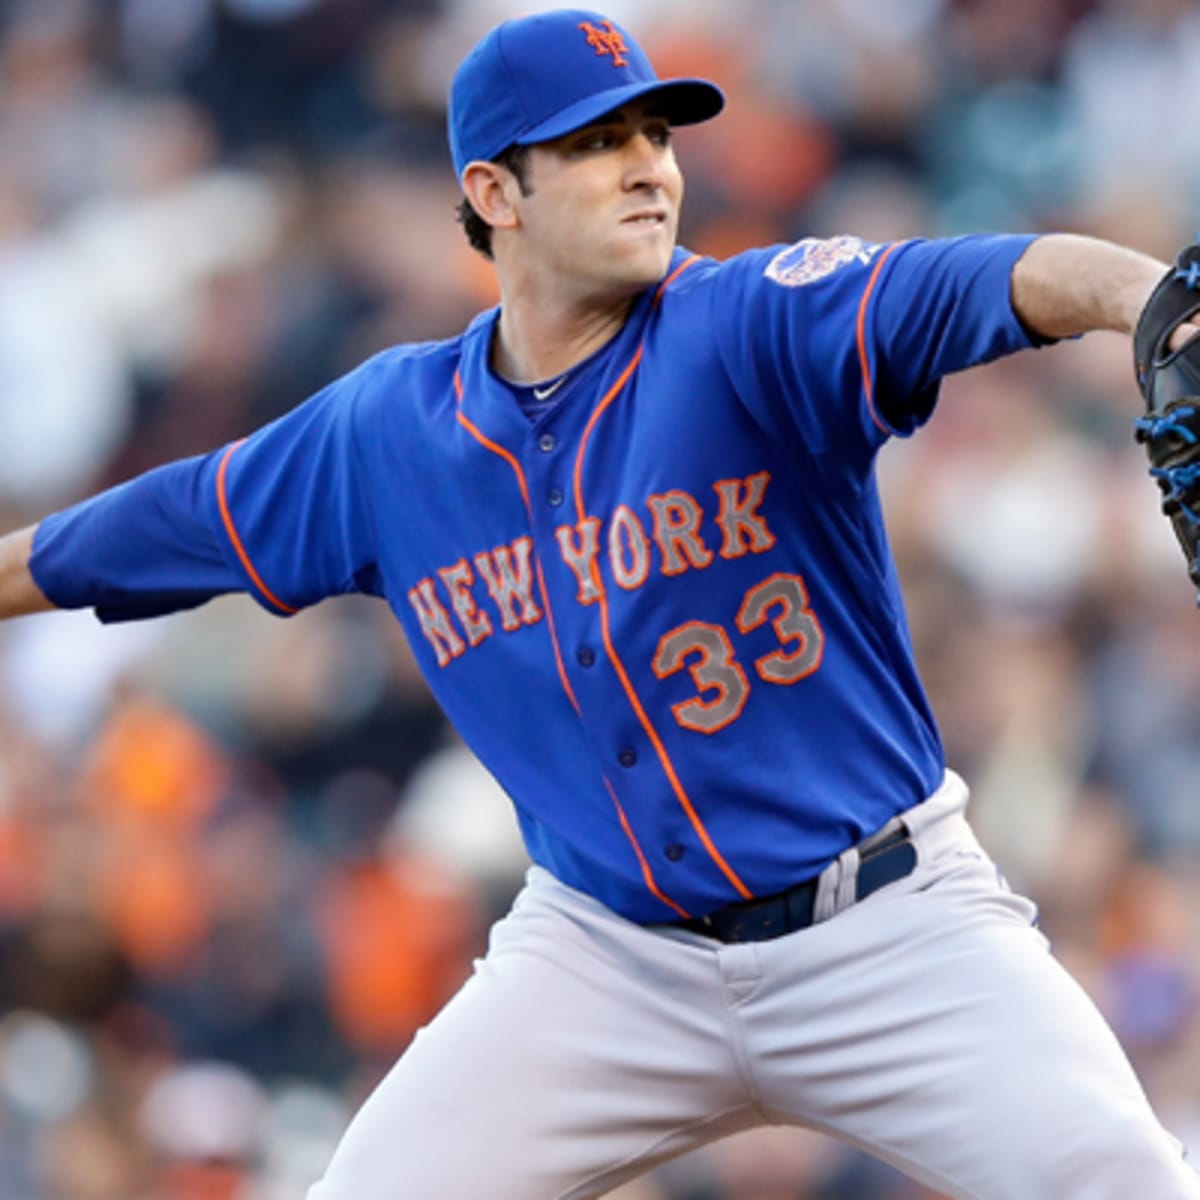 Mets' Matt Harvey says he's 'embarrassed' by portrayal in magazine